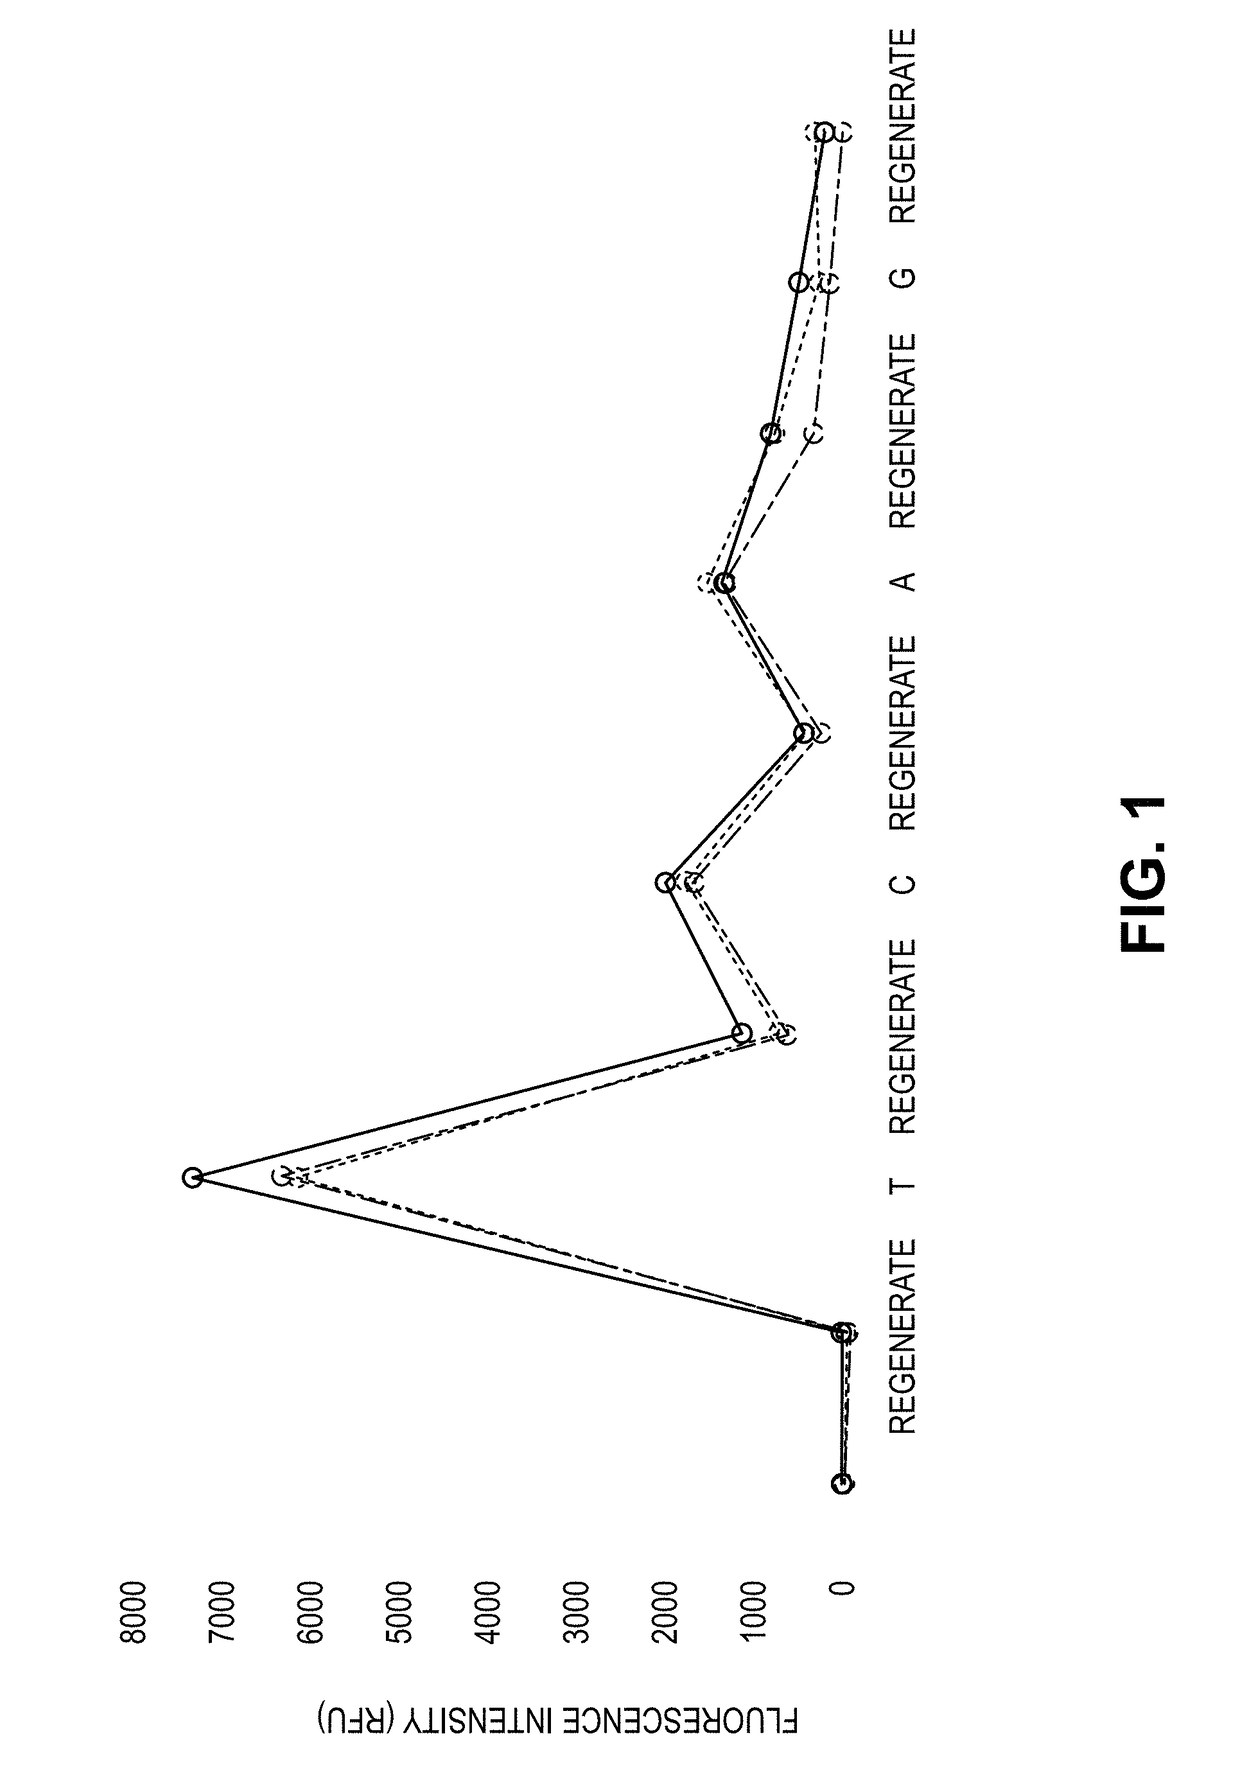 Process for cognate nucleotide detection in a nucleic acid sequencing workflow